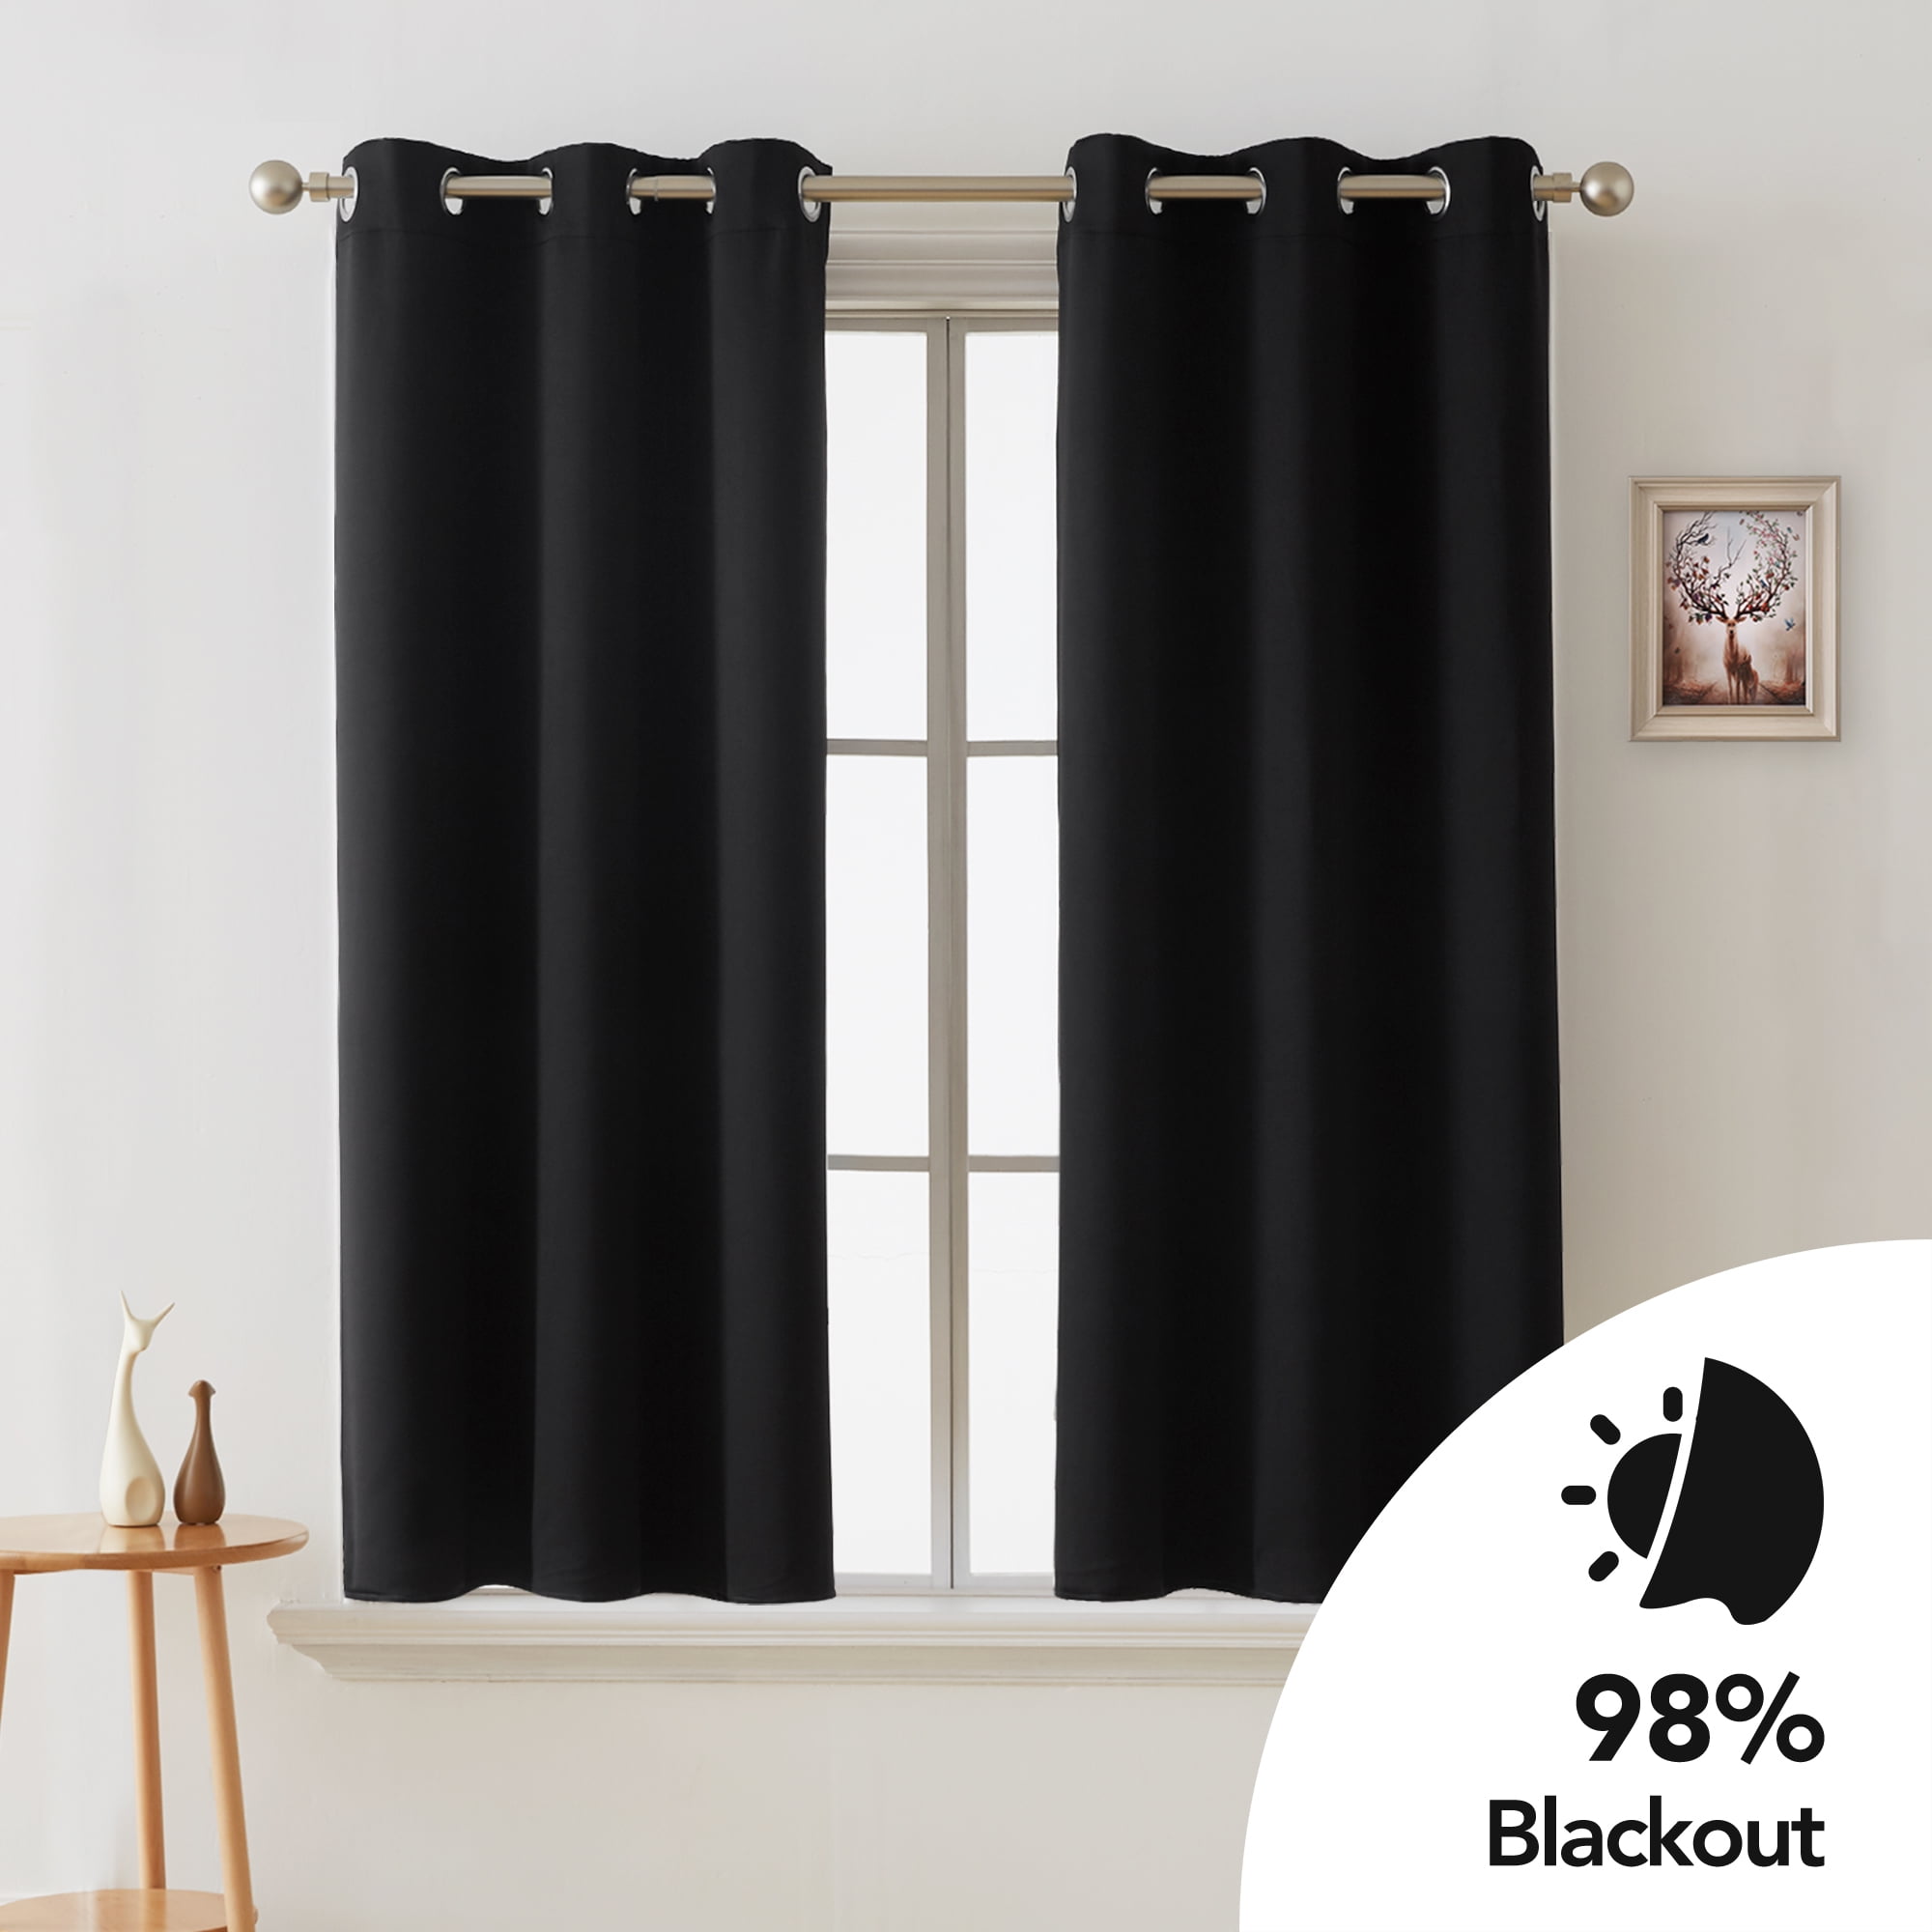 2 Panels, 42x63 in Noise Reducing Panels for Living Room Deconovo Room Darkening Thermal Insulated Grommet Black Blackout Curtains